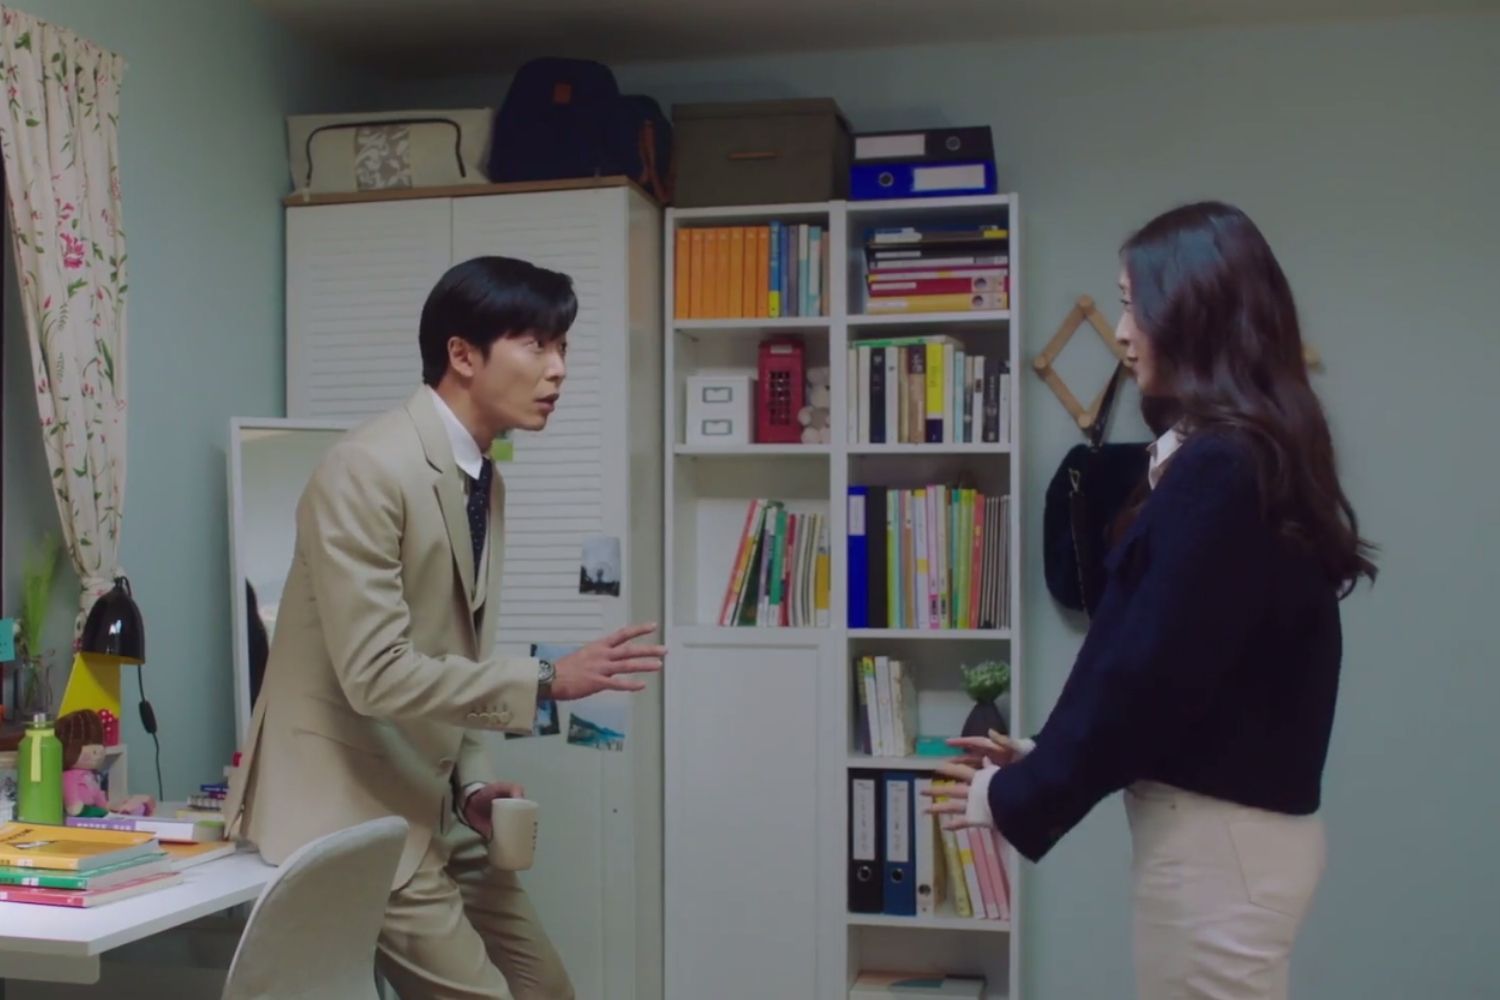 Featuring Noh Gojin and Lee Shin A- The scene where he tries to convince Lee to let go of her dream of becoming an instructor yet ends up encouraging her.